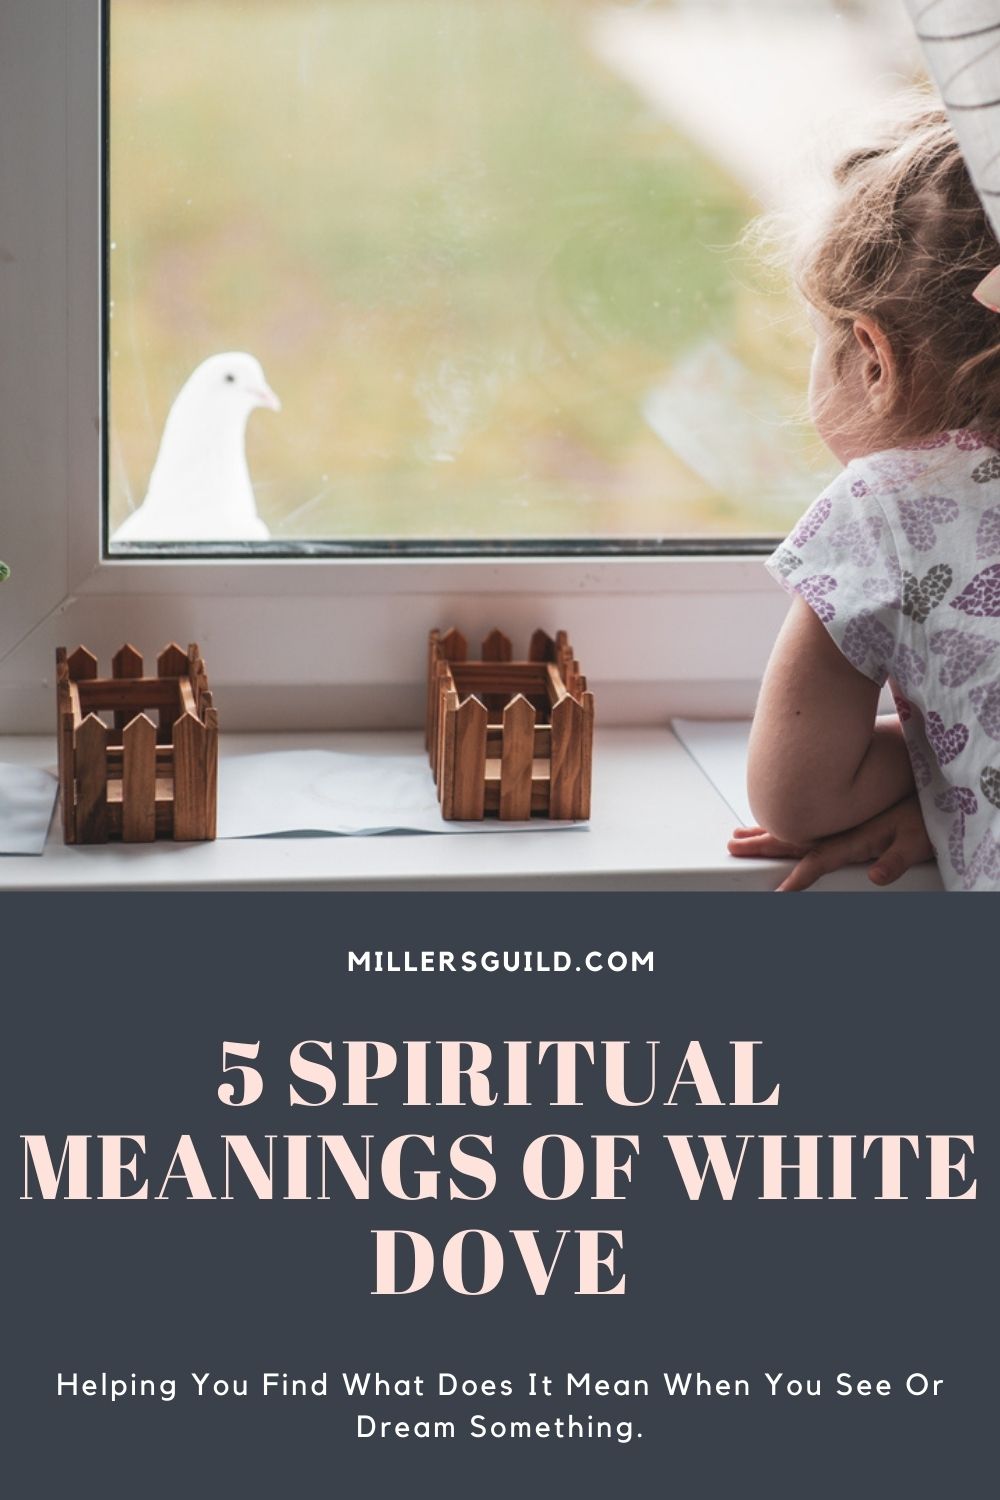 Spiritual Meanings of White Dove